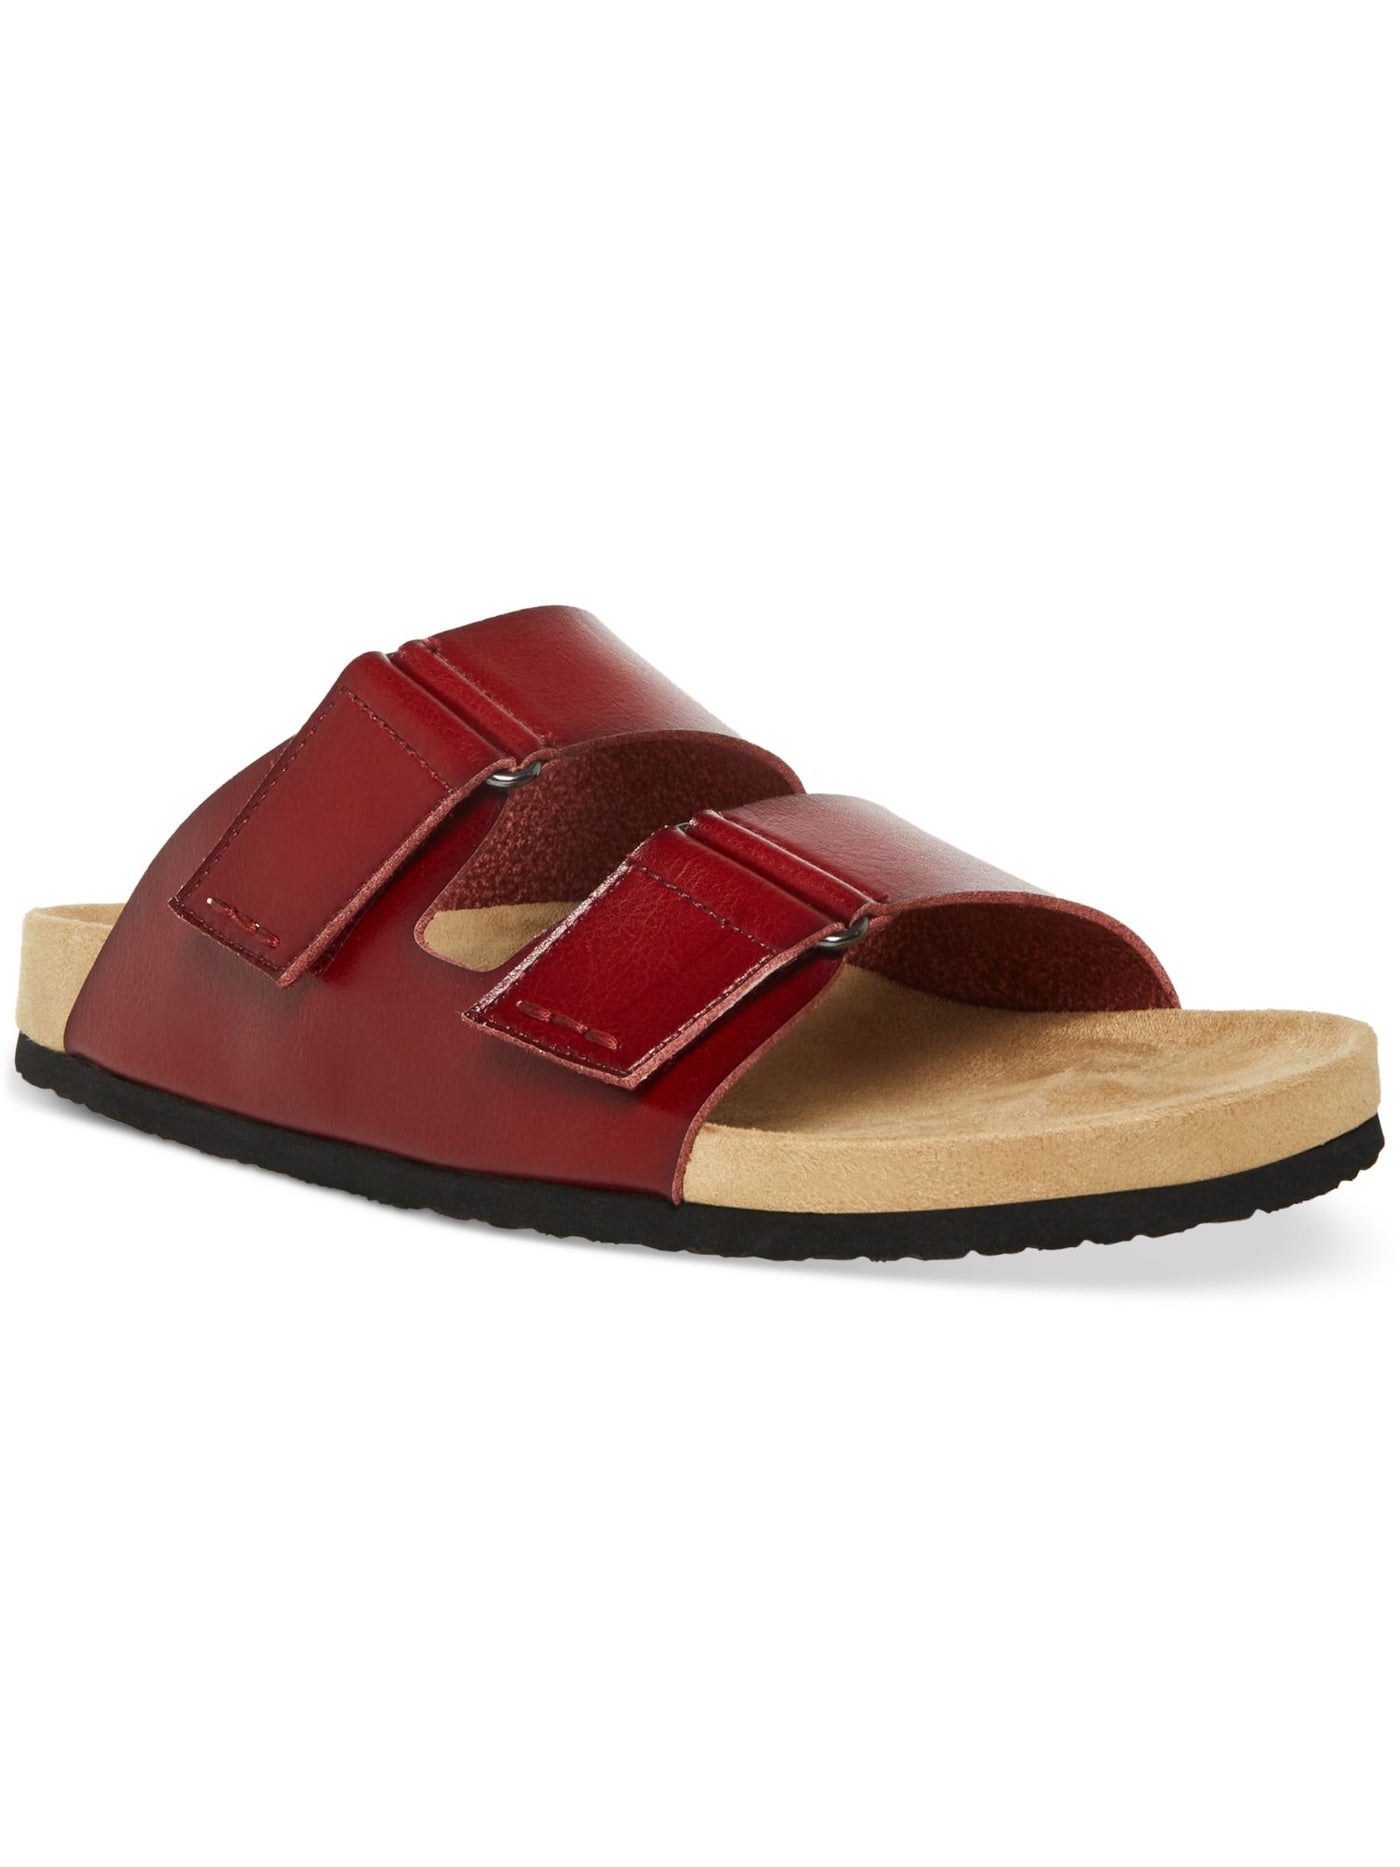 MADDEN Mens Maroon Double Straps Contoured Footbed Padded Tisson Round Toe Leather Sandals Shoes 11